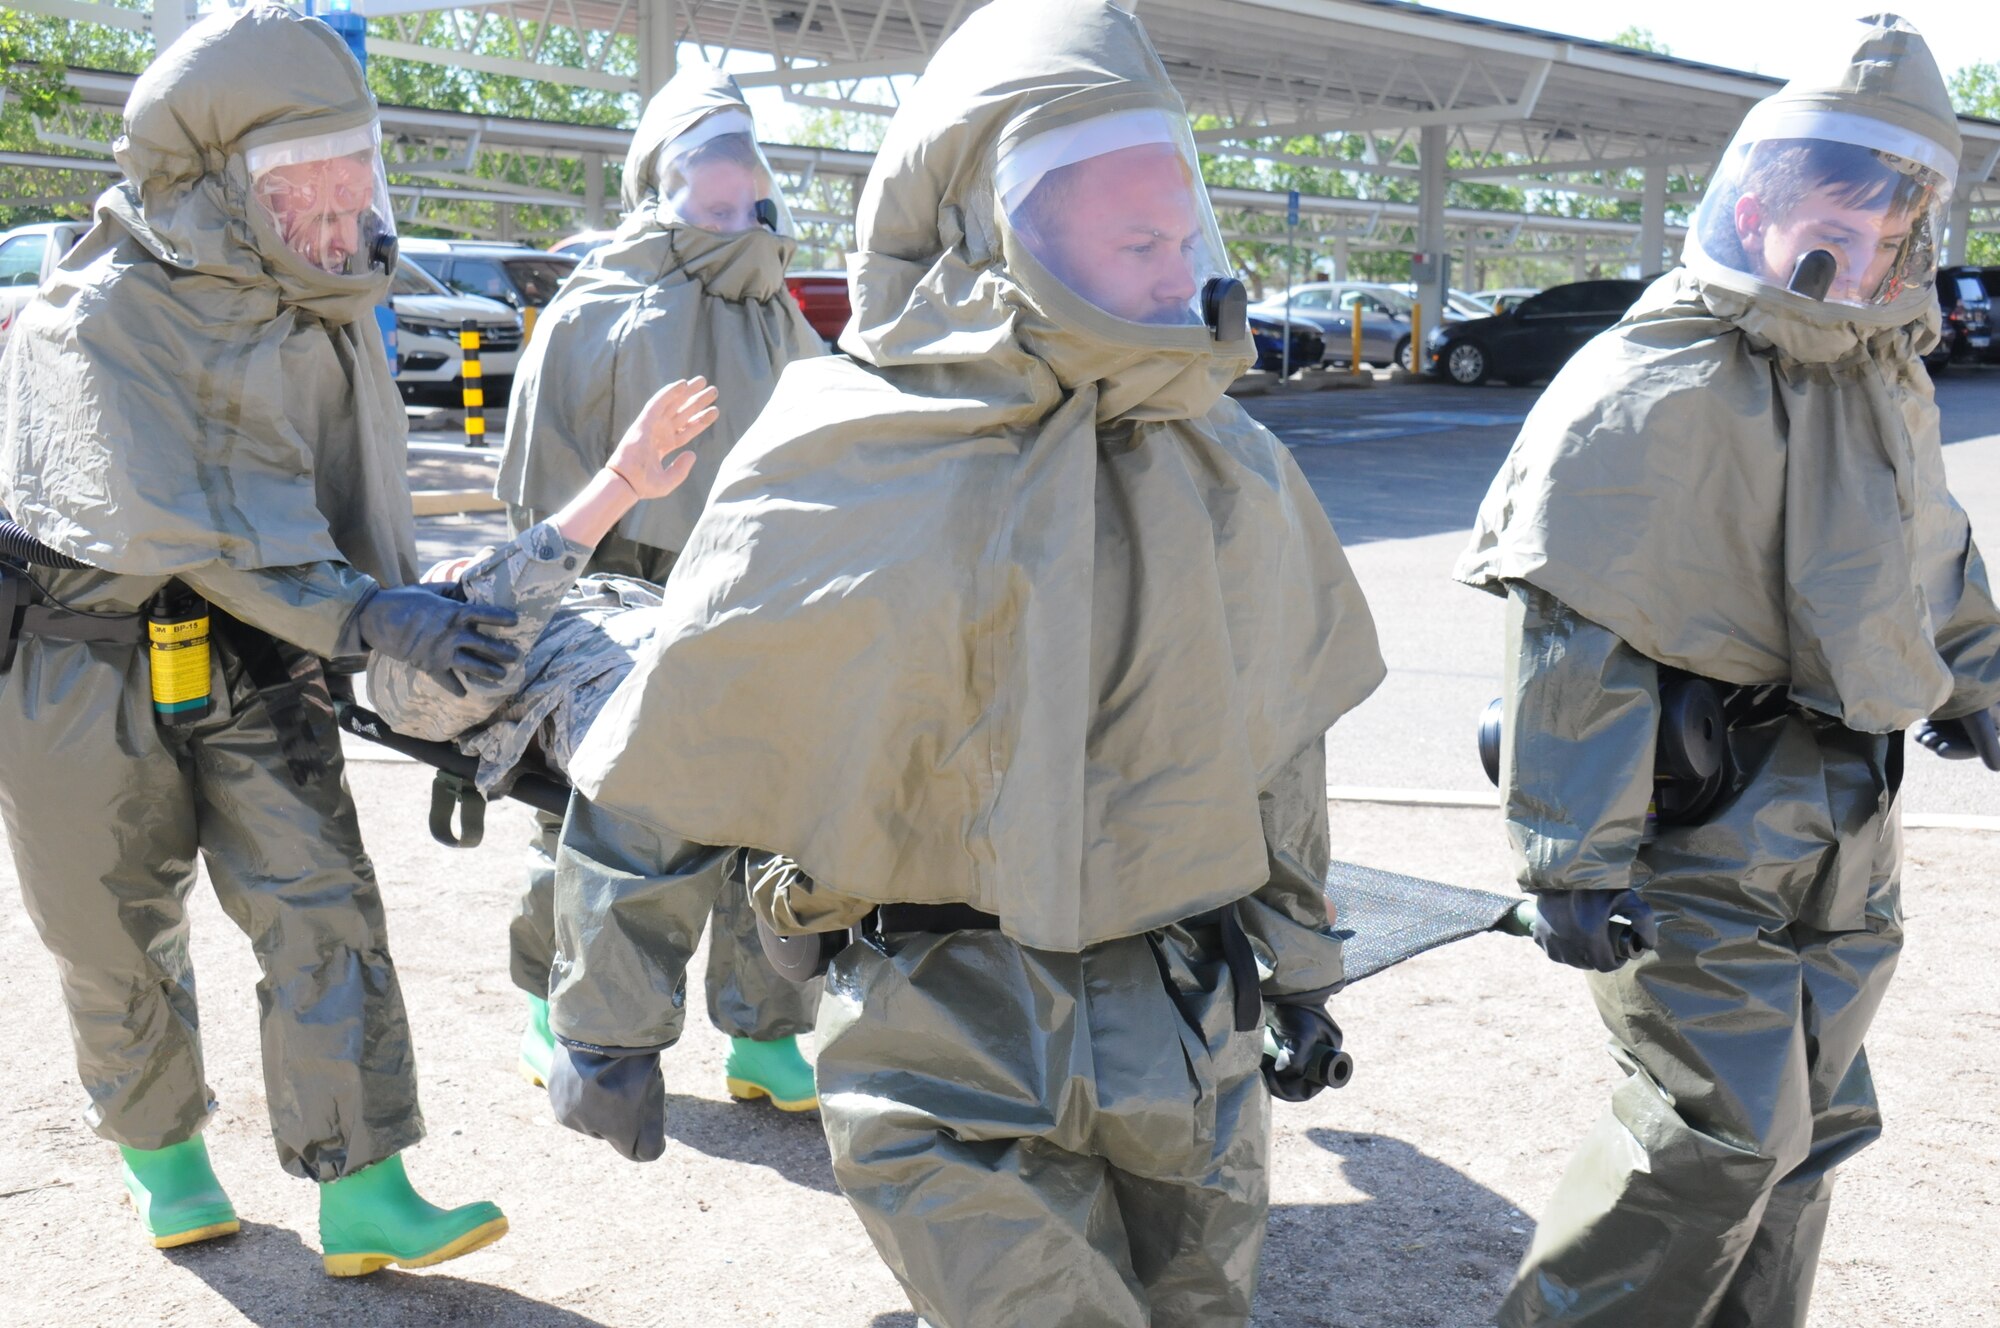 Military medics carry a simulated patient on a litter.